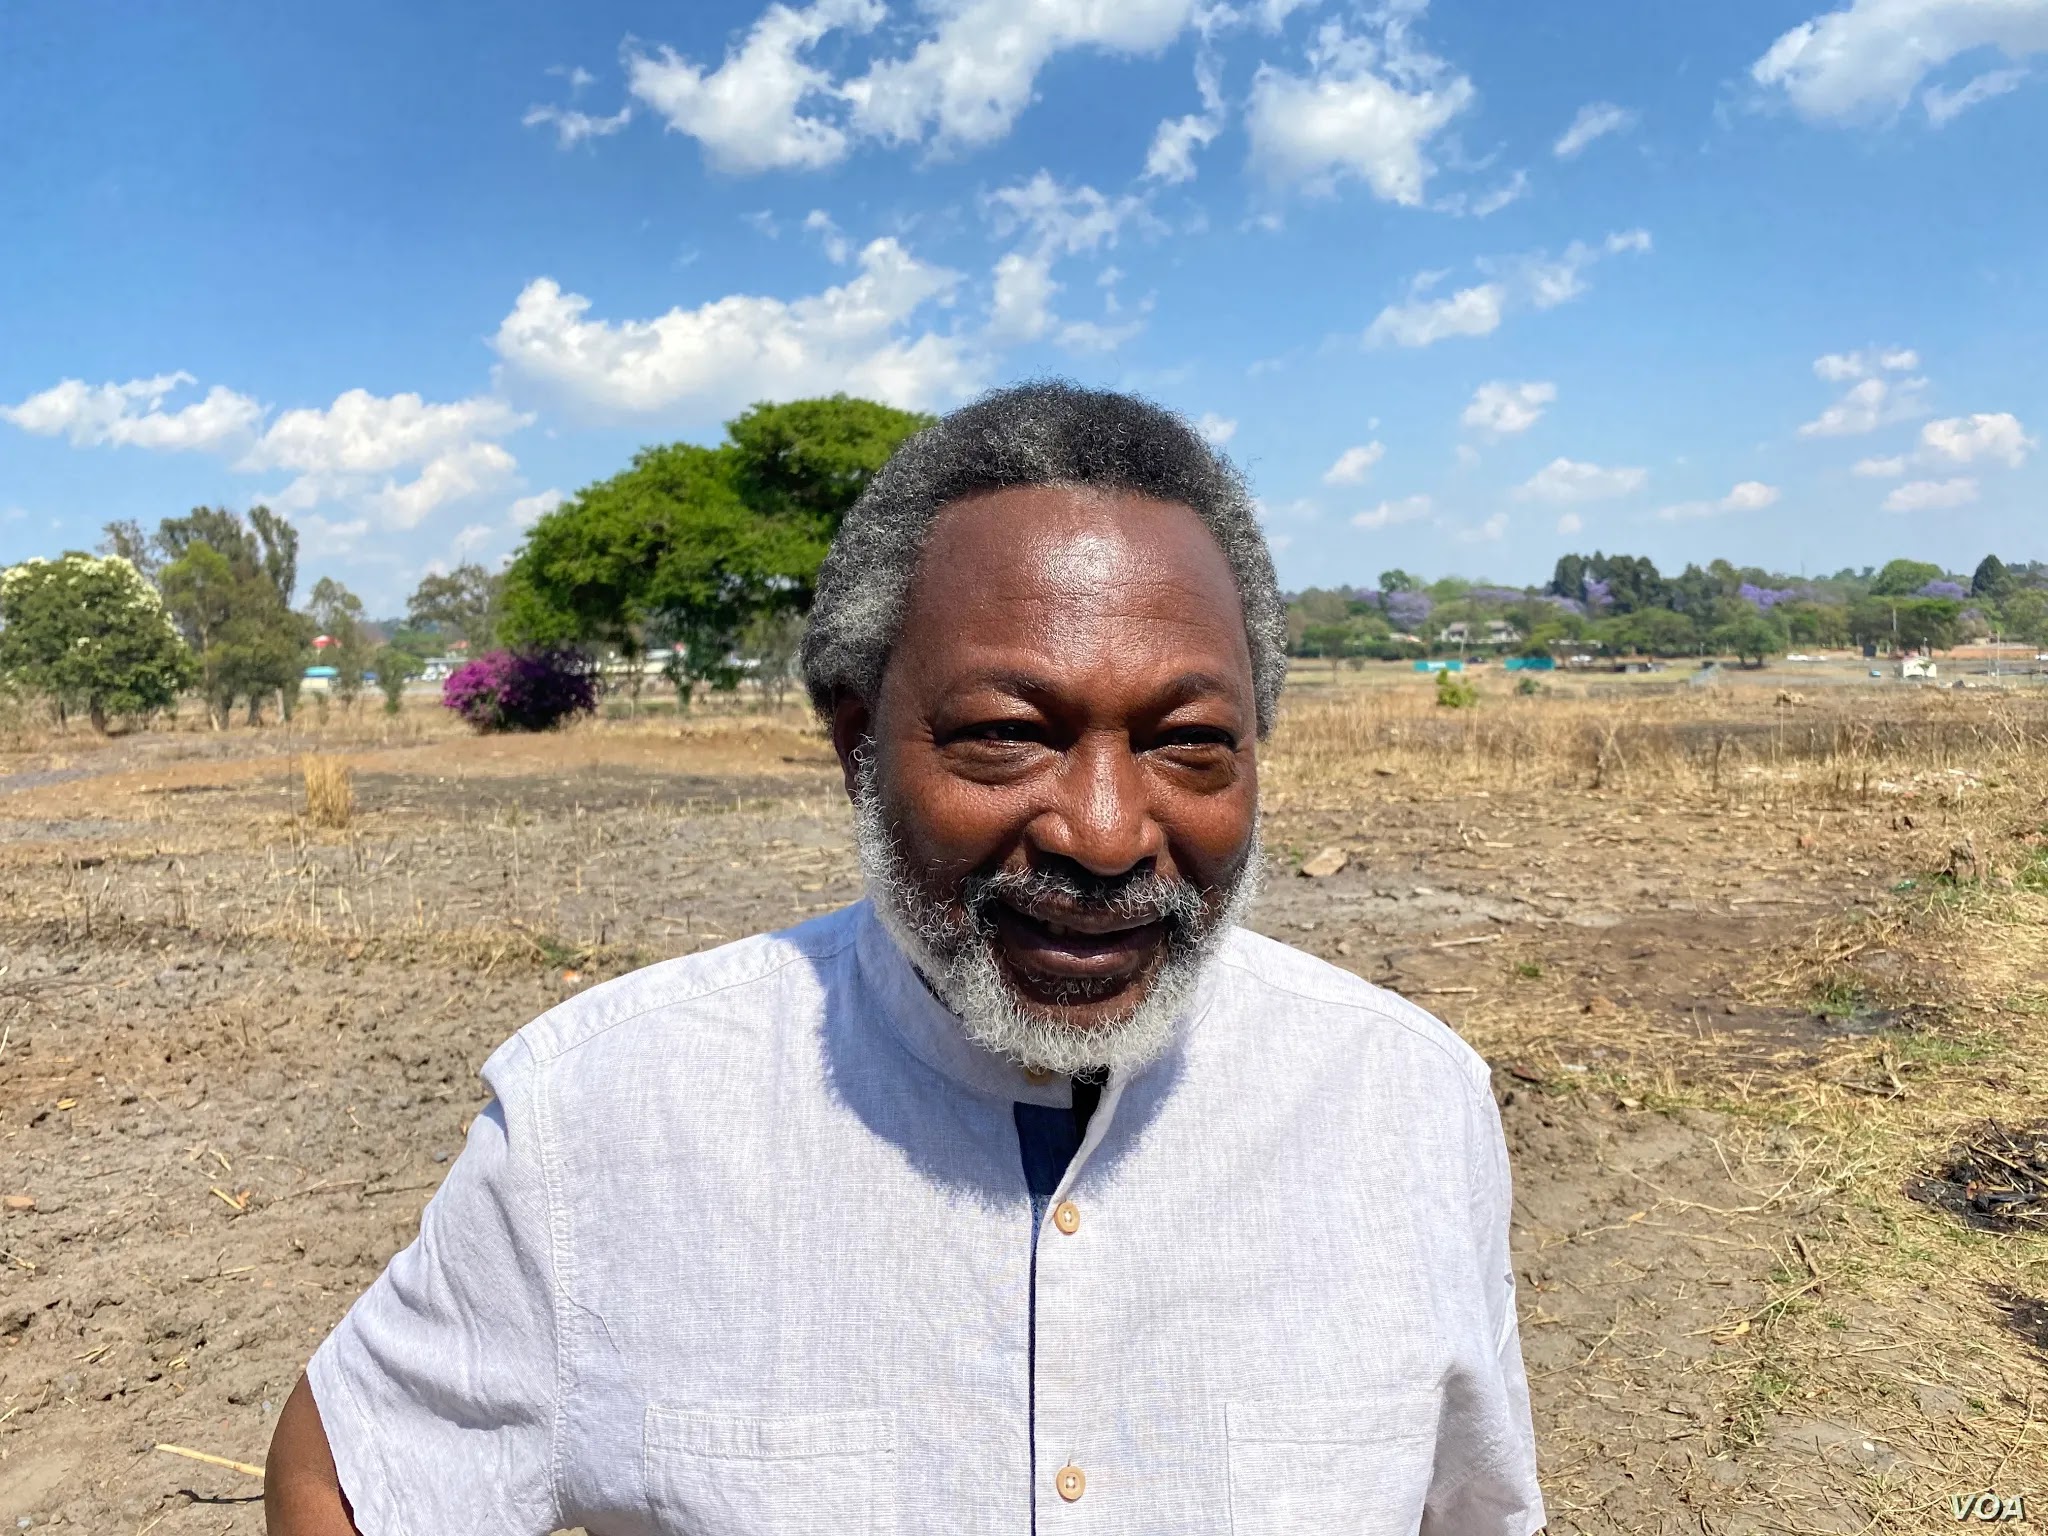 Mandivamba Rukuni, a former economics professor at the University of Zimbabwe who now directs a charity focused on farming innovation in Africa, says “early shoots” is labor intensive, October 24, 2020. (Columbus Mavhunga/VOA)